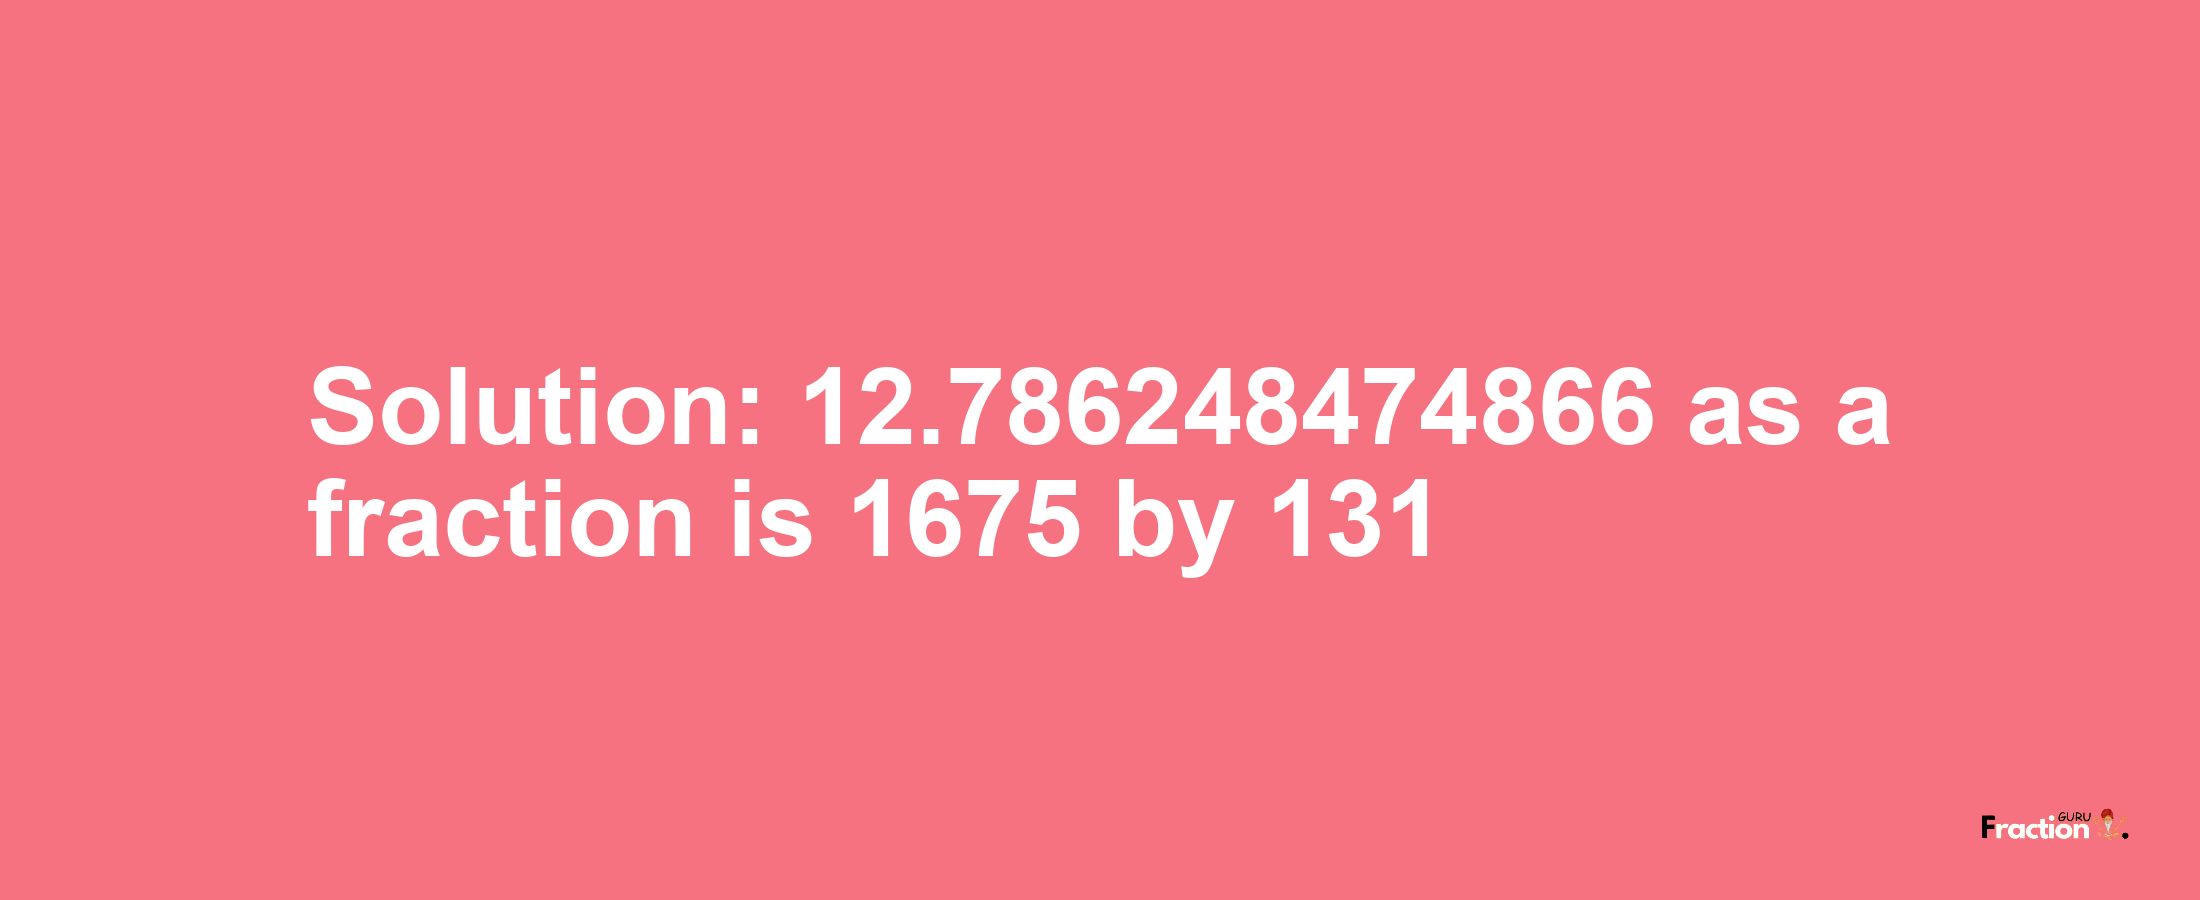 Solution:12.786248474866 as a fraction is 1675/131